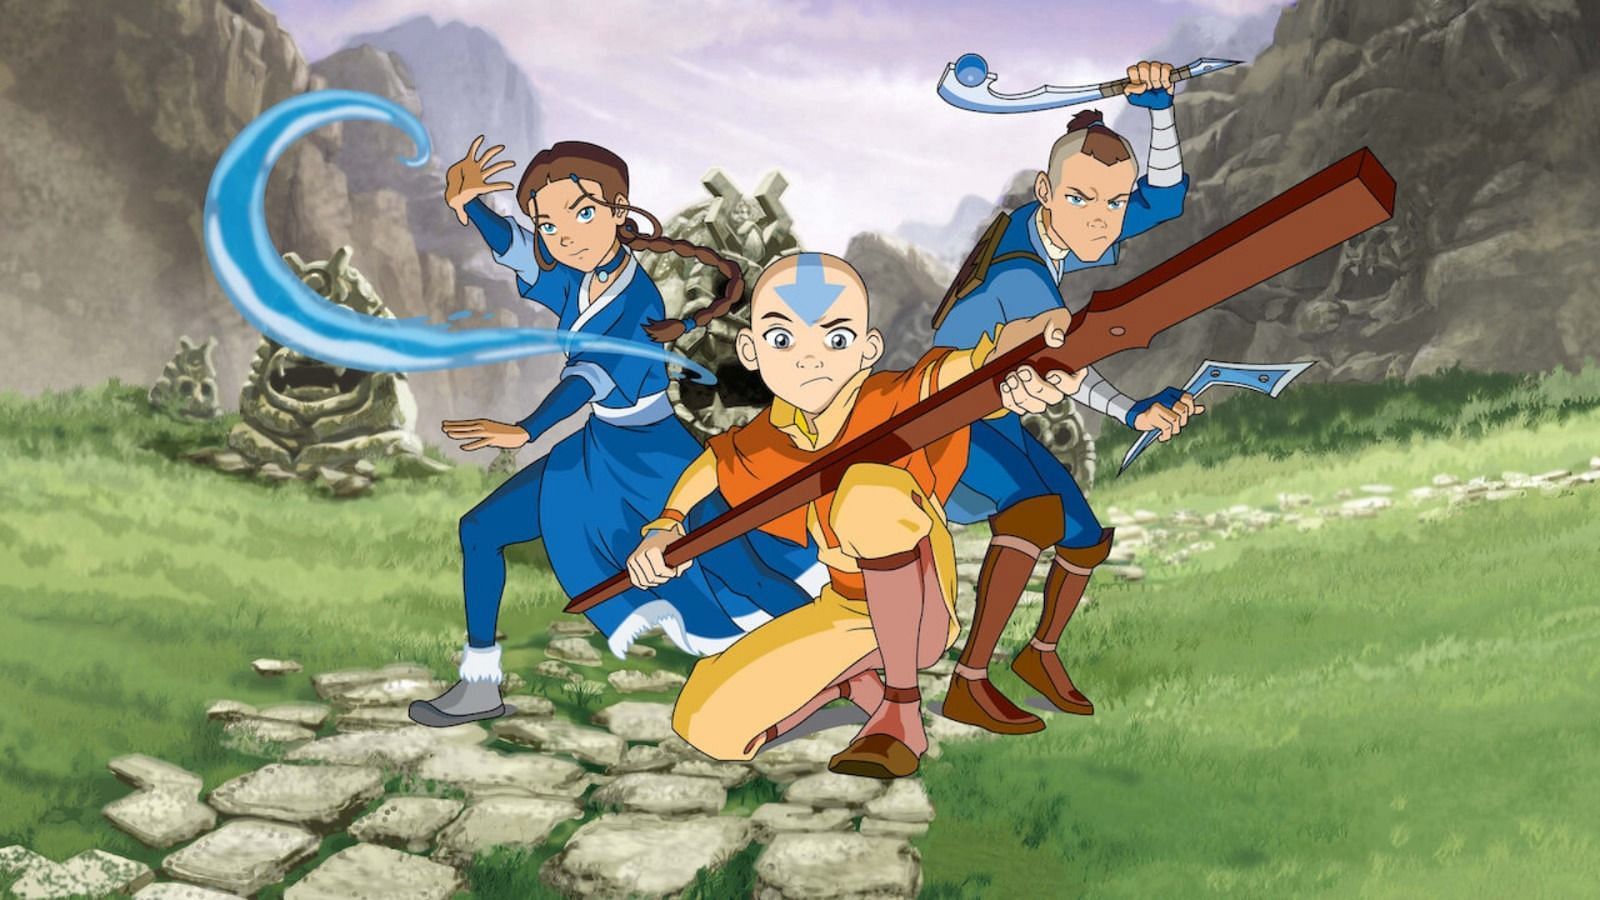 Netflix's Avatar: The Last Airbender Series Reveals Who Will Play Aang